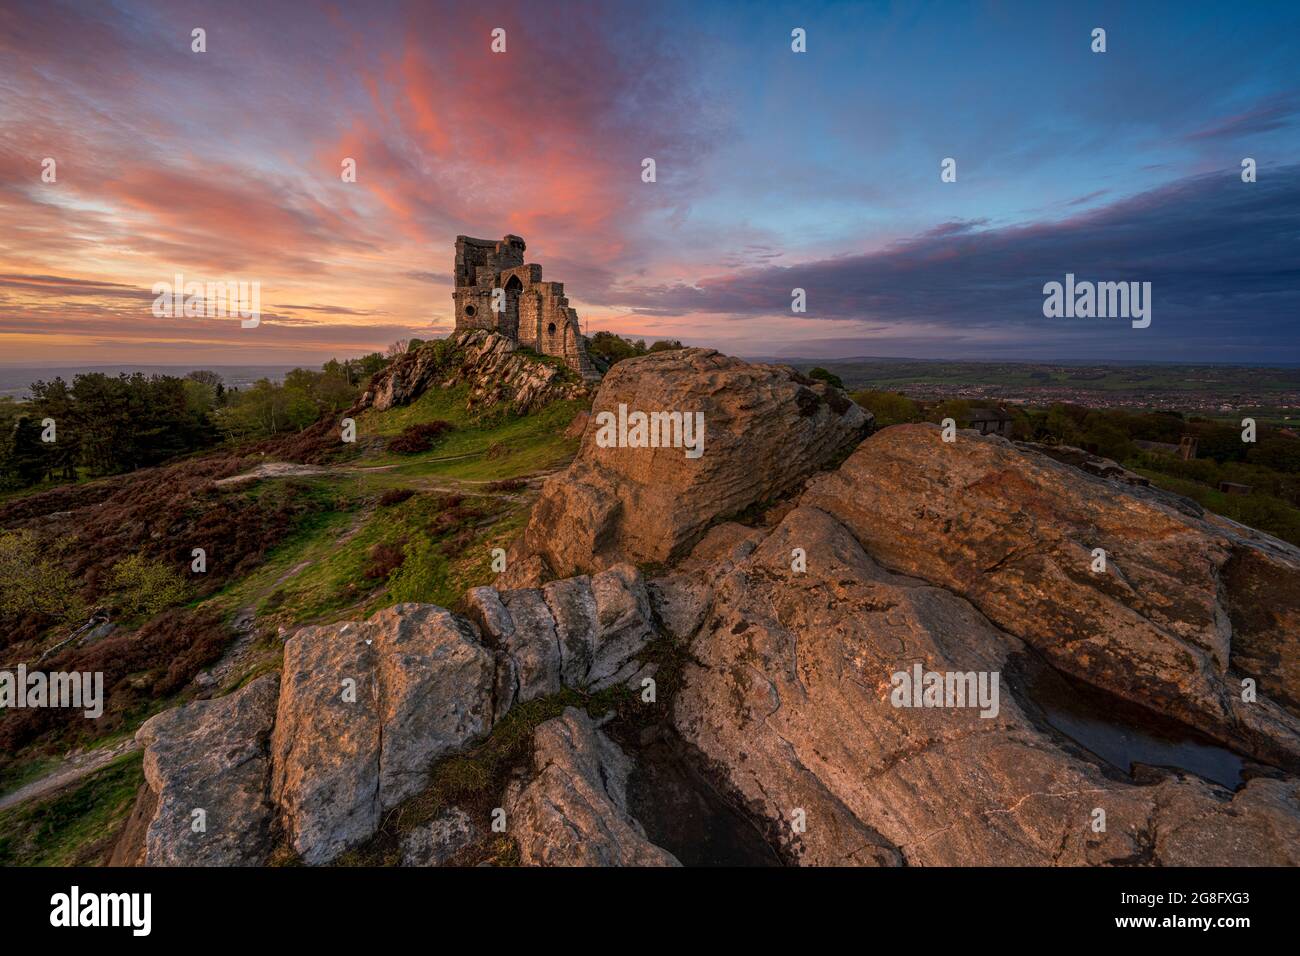 The Folly at Mow Cop with incredible sunset, Mow Cop, Cheshire, England, United Kingdom, Europe Stock Photo